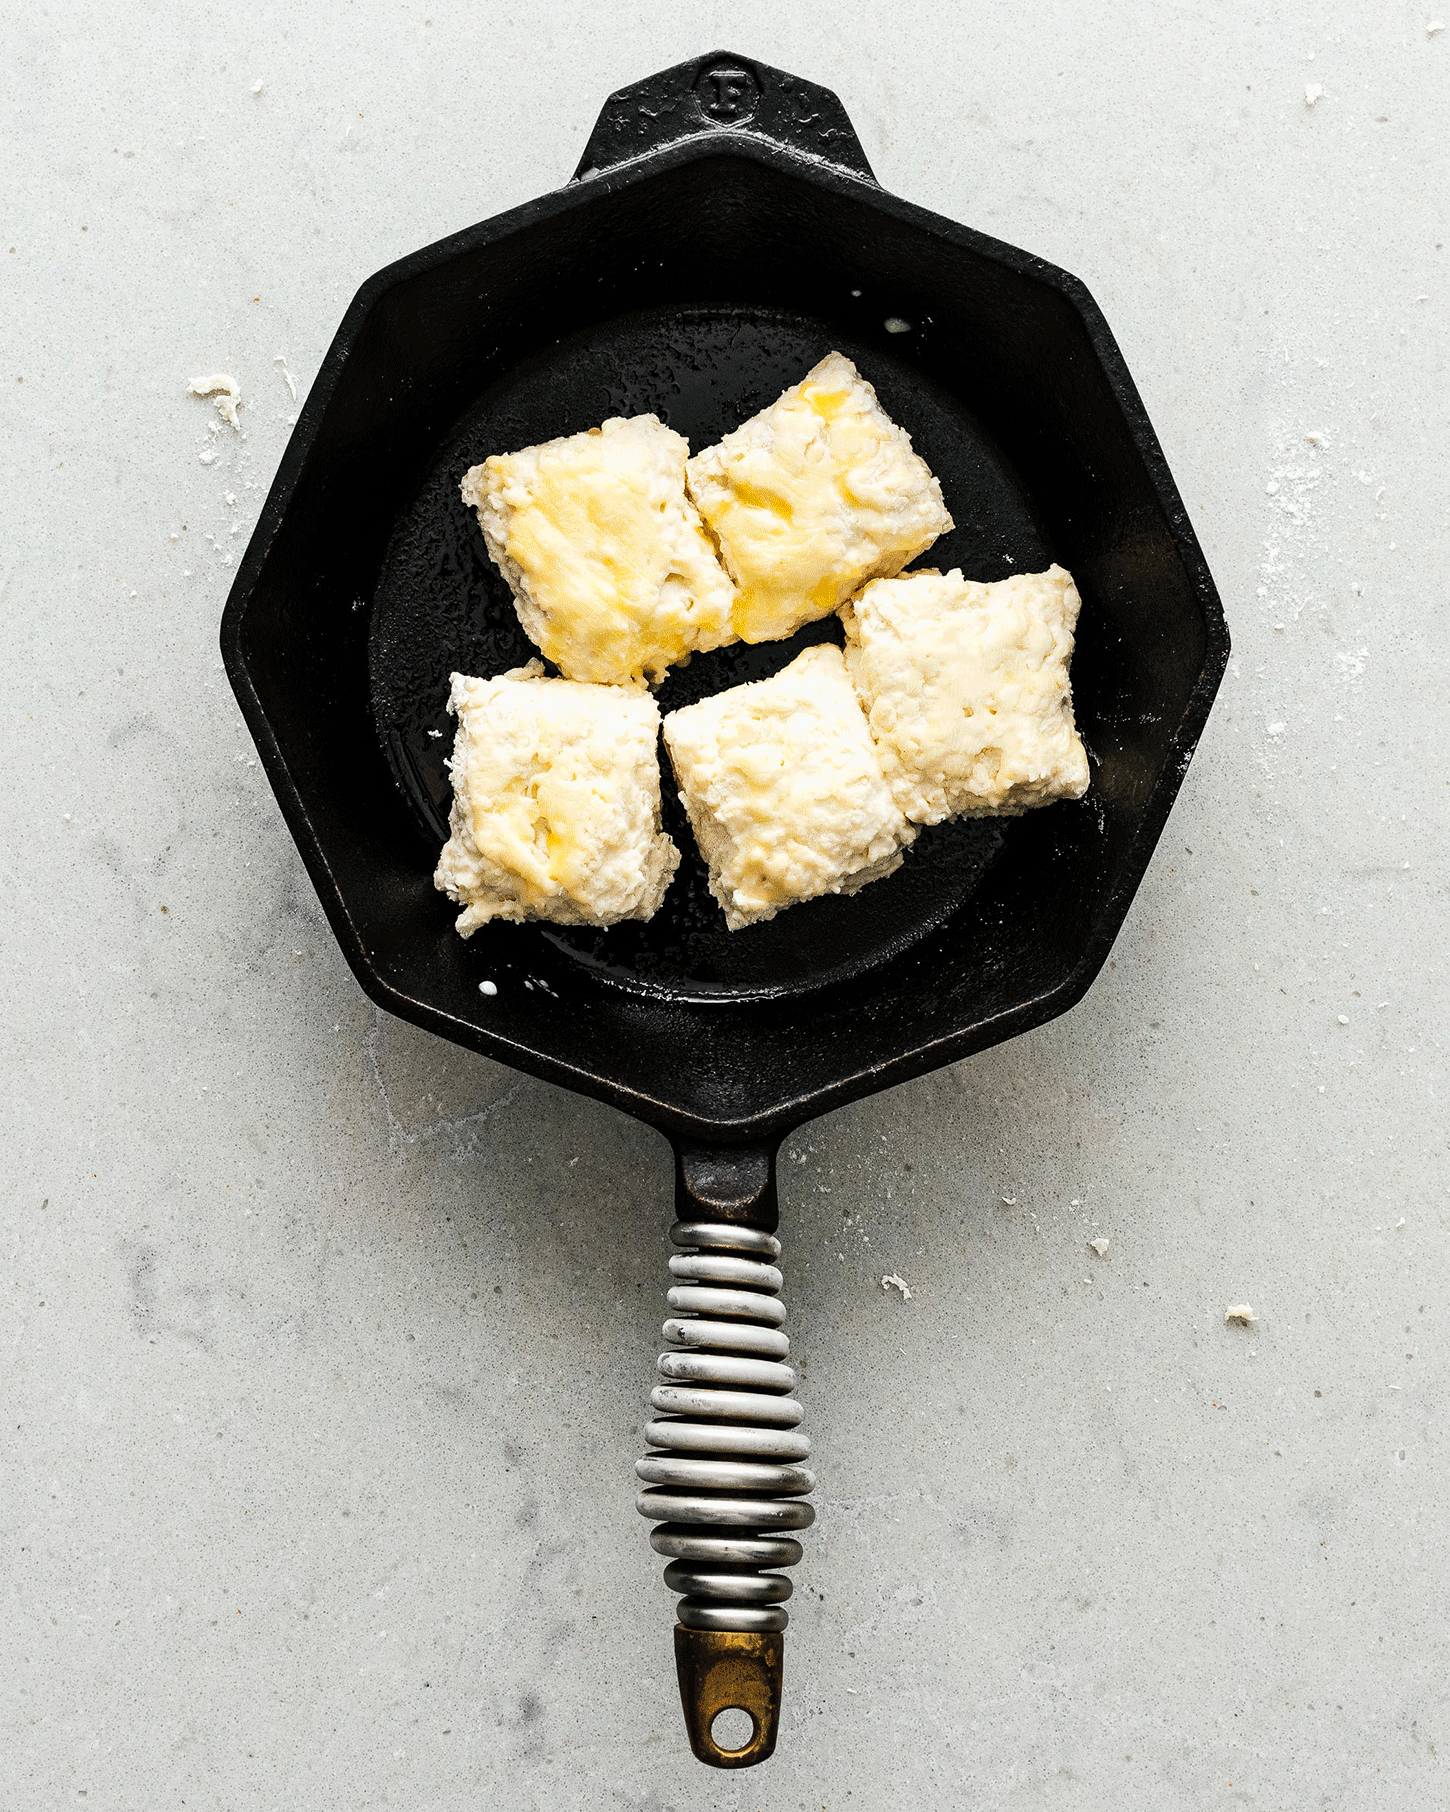 Small Batch Skillet Buttermilk Biscuits | www.iamafoodblog.com